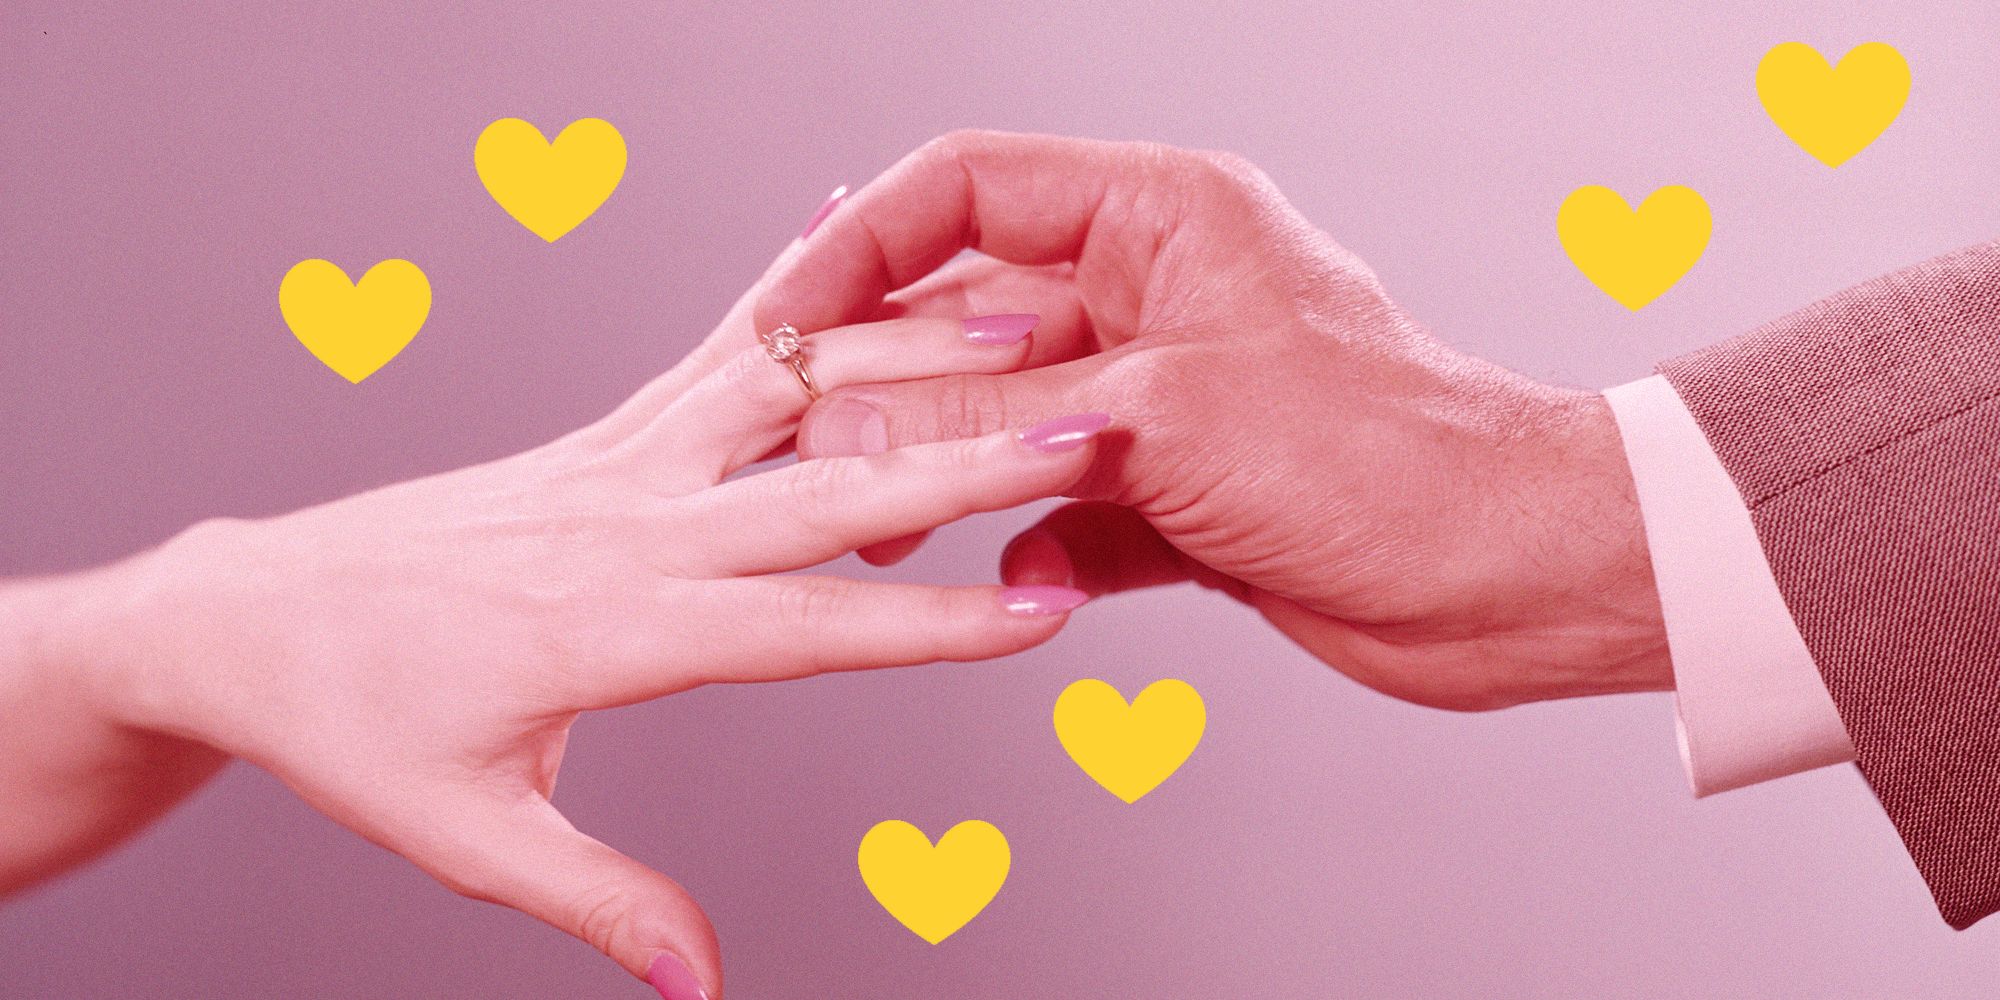 Heart, Finger, Hand, Love, Pink, Valentine's day, Gesture, Nail, Thumb, Play, 